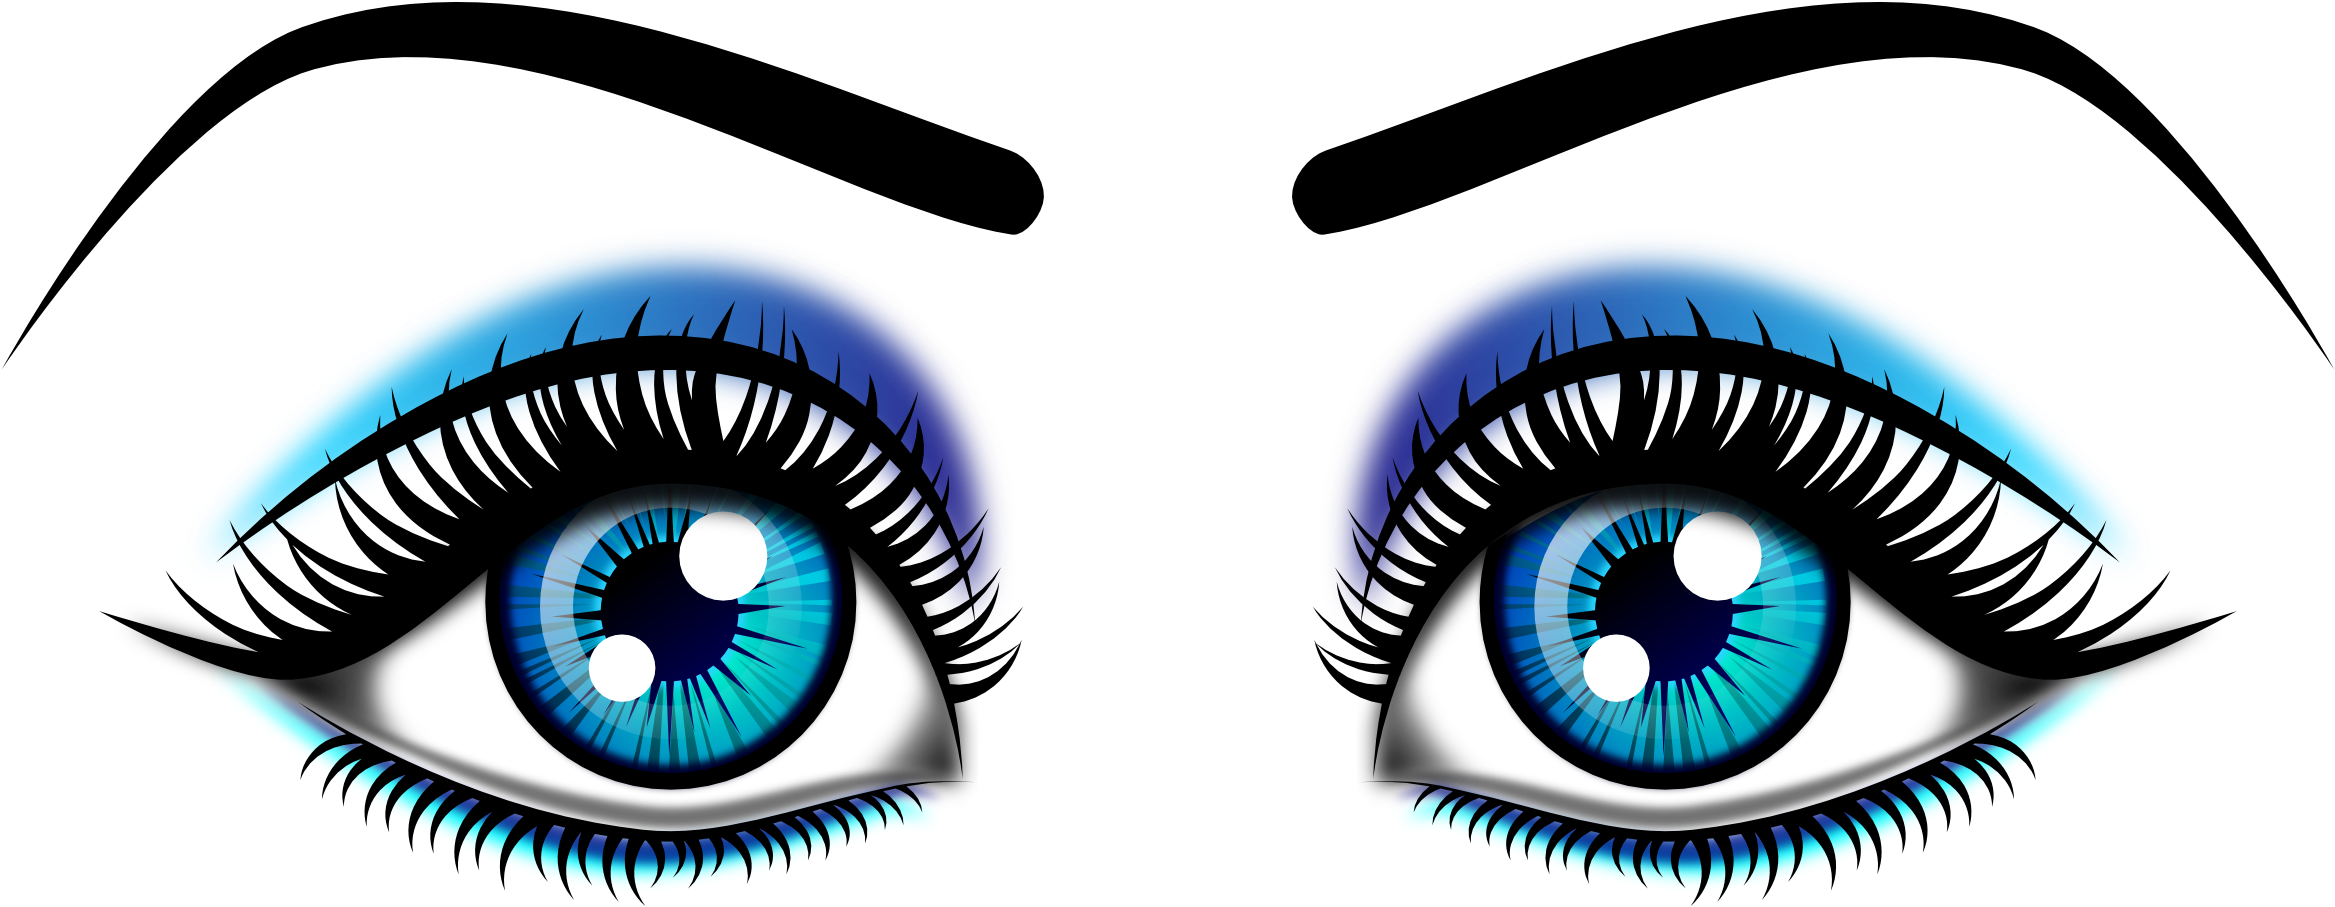 Eyes Png Image - Clip Art Of Eyes (1969x788), Png Download